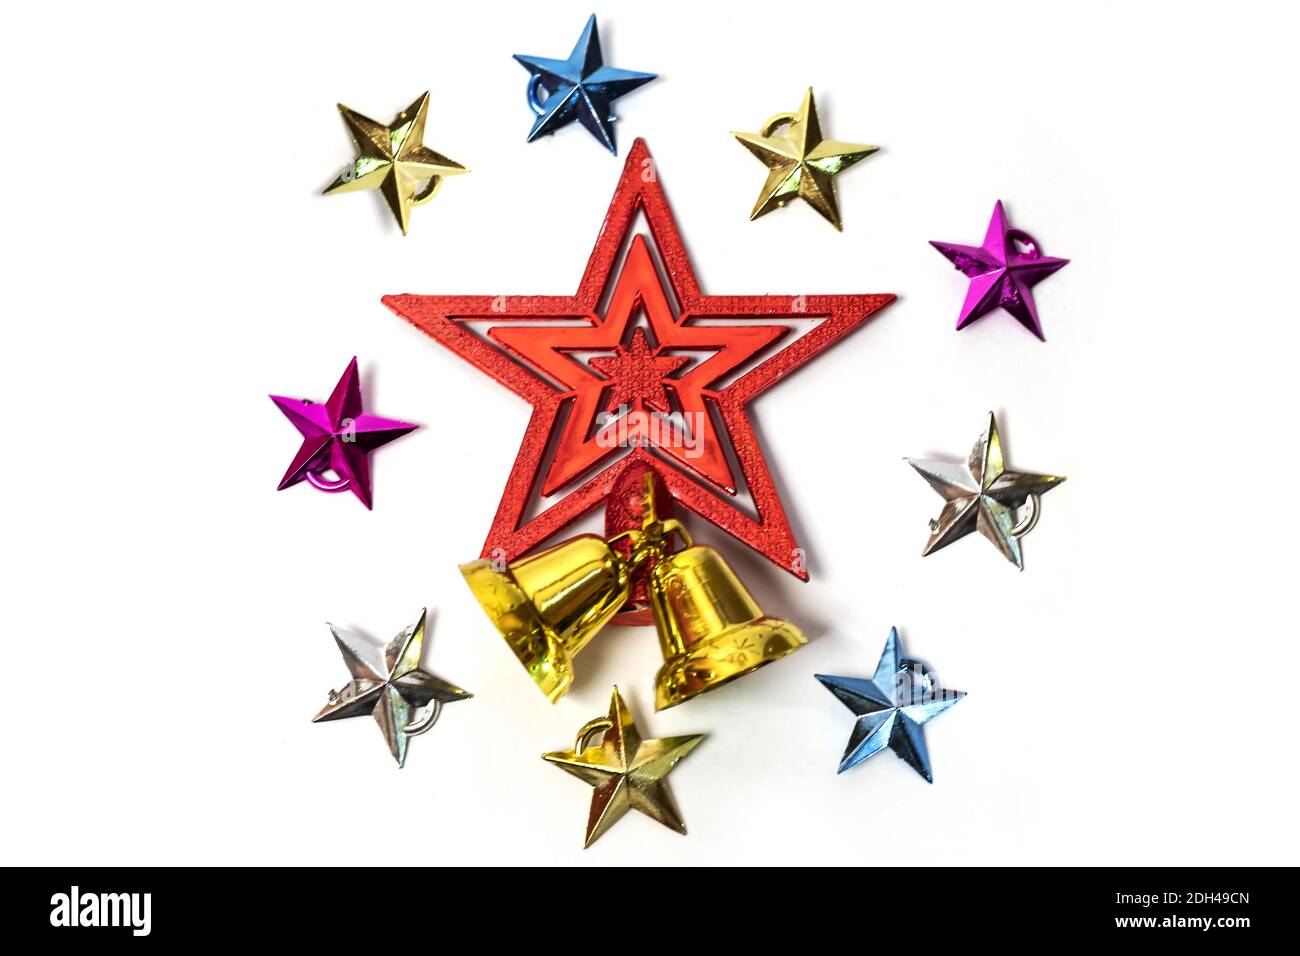 Big star Cut Out Stock Images & Pictures - Alamy